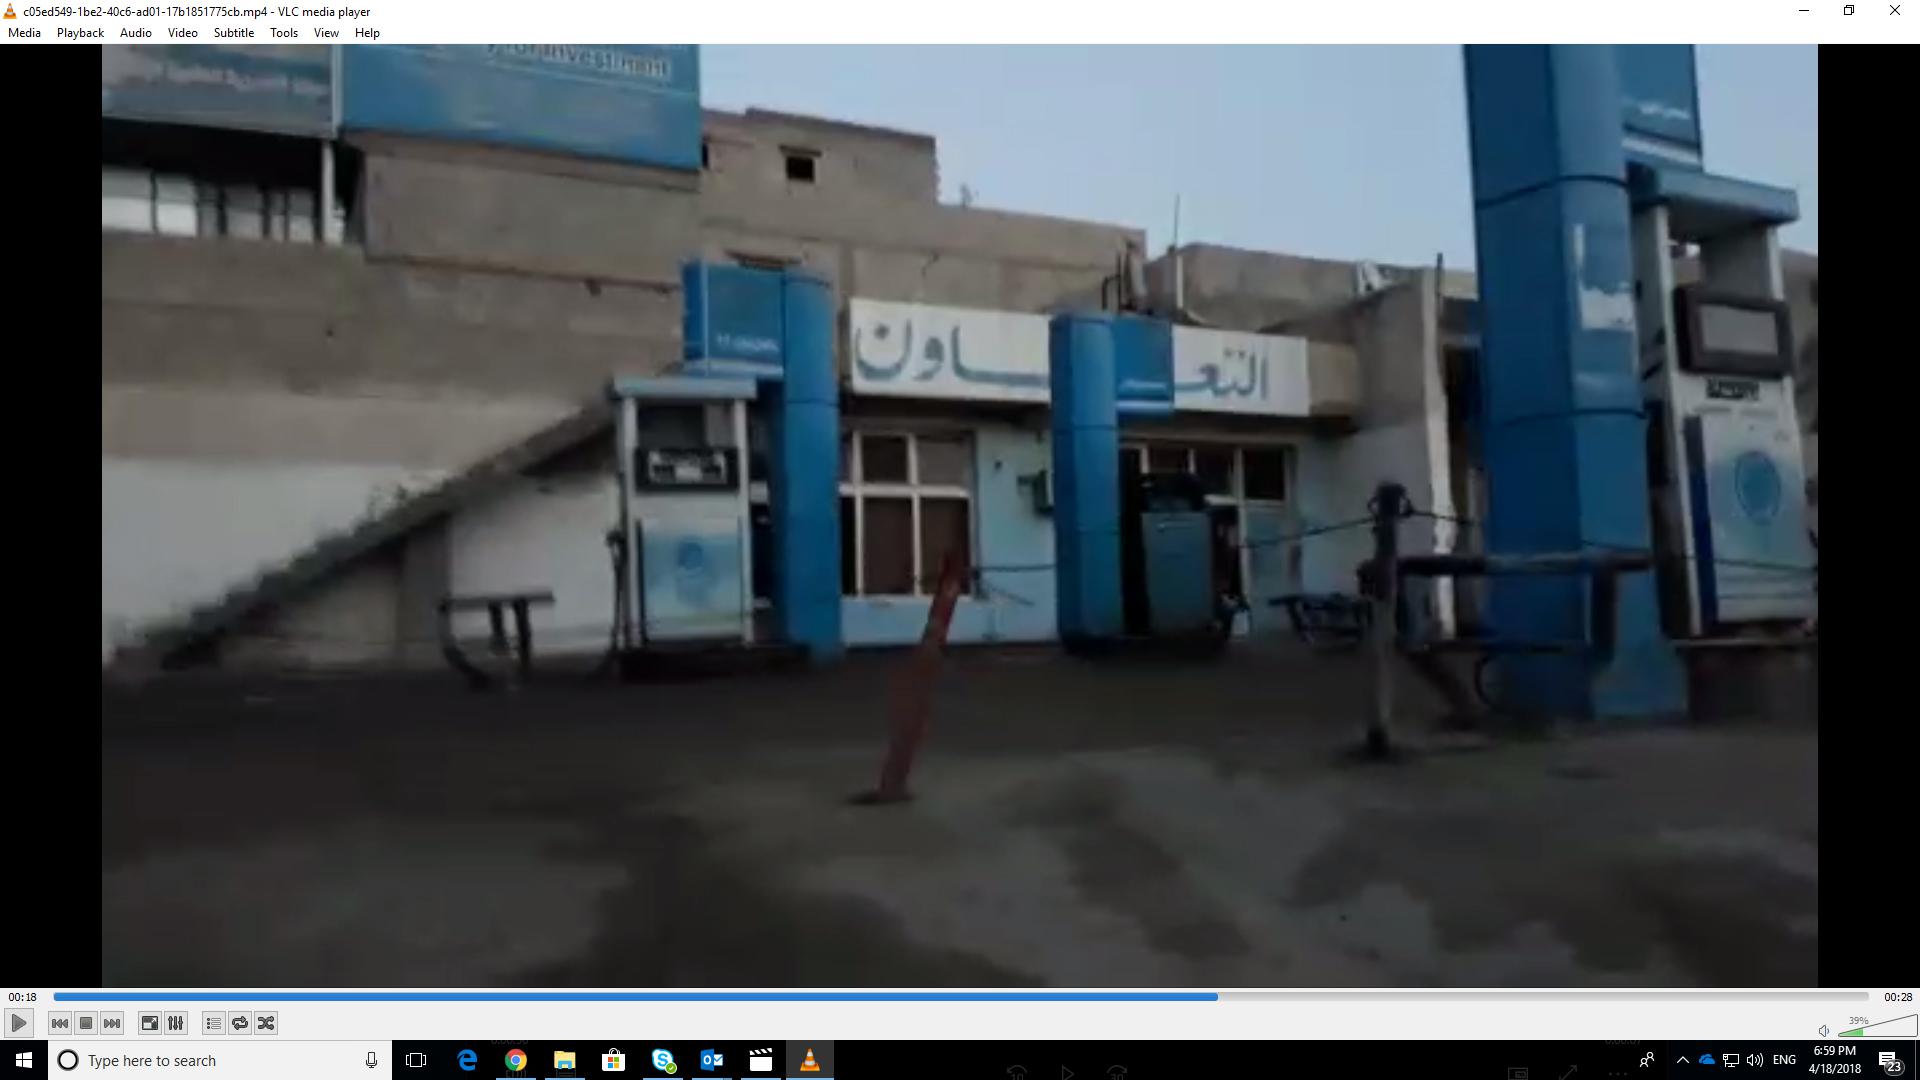 Still image from a video provided to Human Rights Watch by a Sinai activist and captured on February 27, showing one closed gas station in al-Arish. © 2018 Private